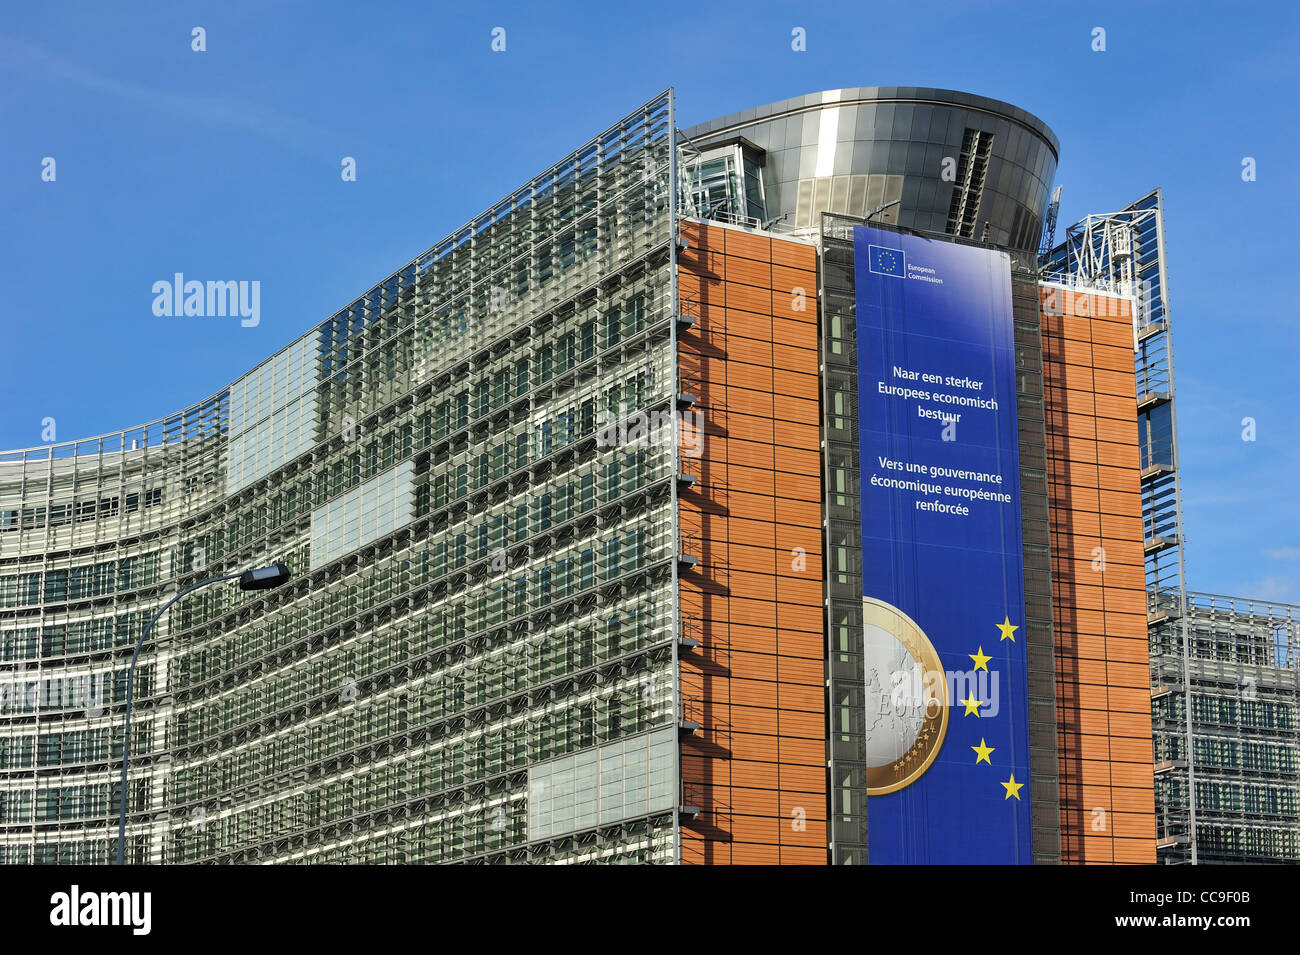 The European Commission, executive body of the European Union, based in the Berlaymont building of Brussels, Belgium Stock Photo